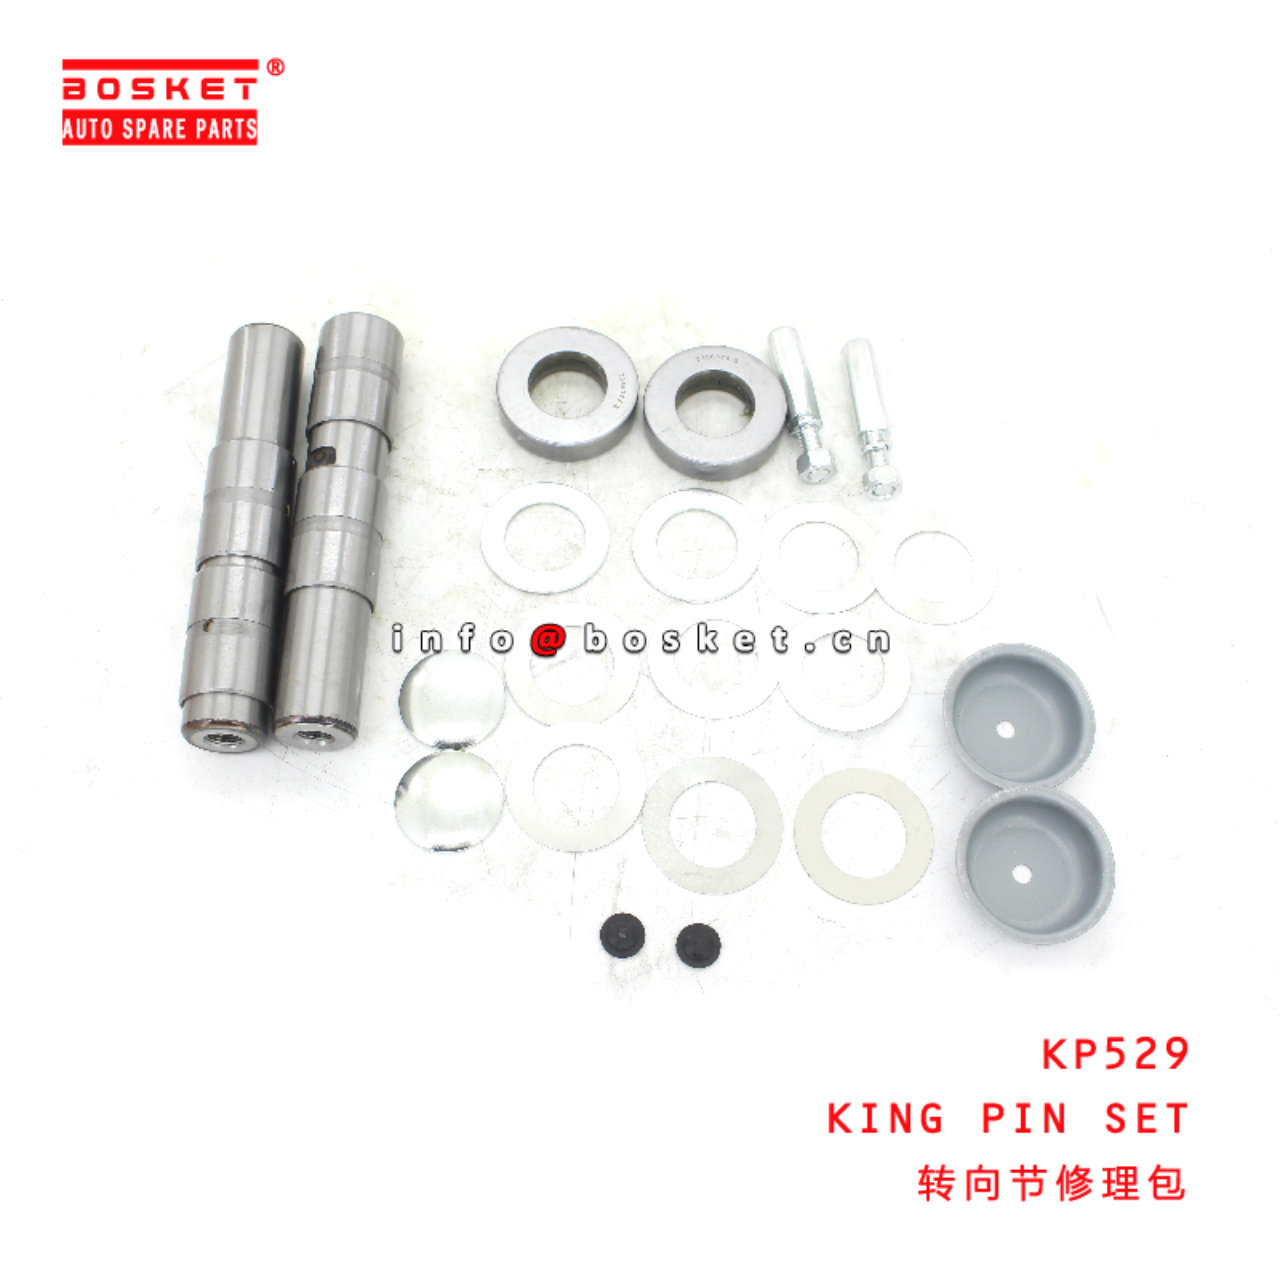 1098002640 1-09800264-0 Bearing Case Ball Bearing Suitable for 